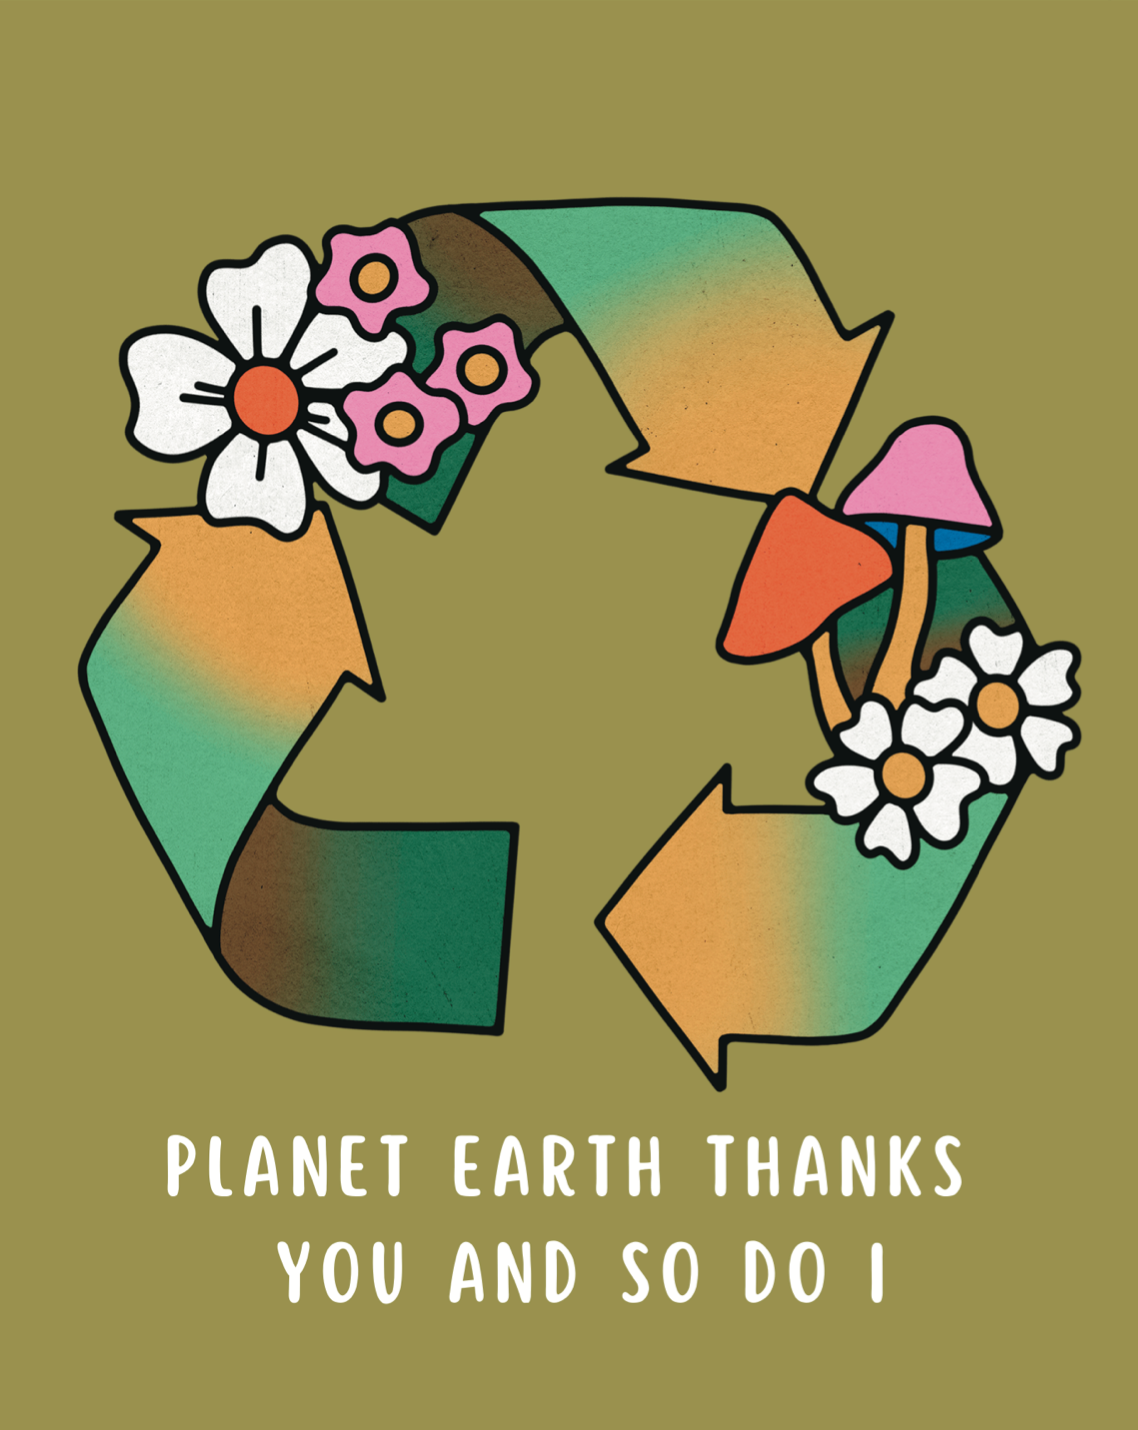 Planet earth thanks you and so do I